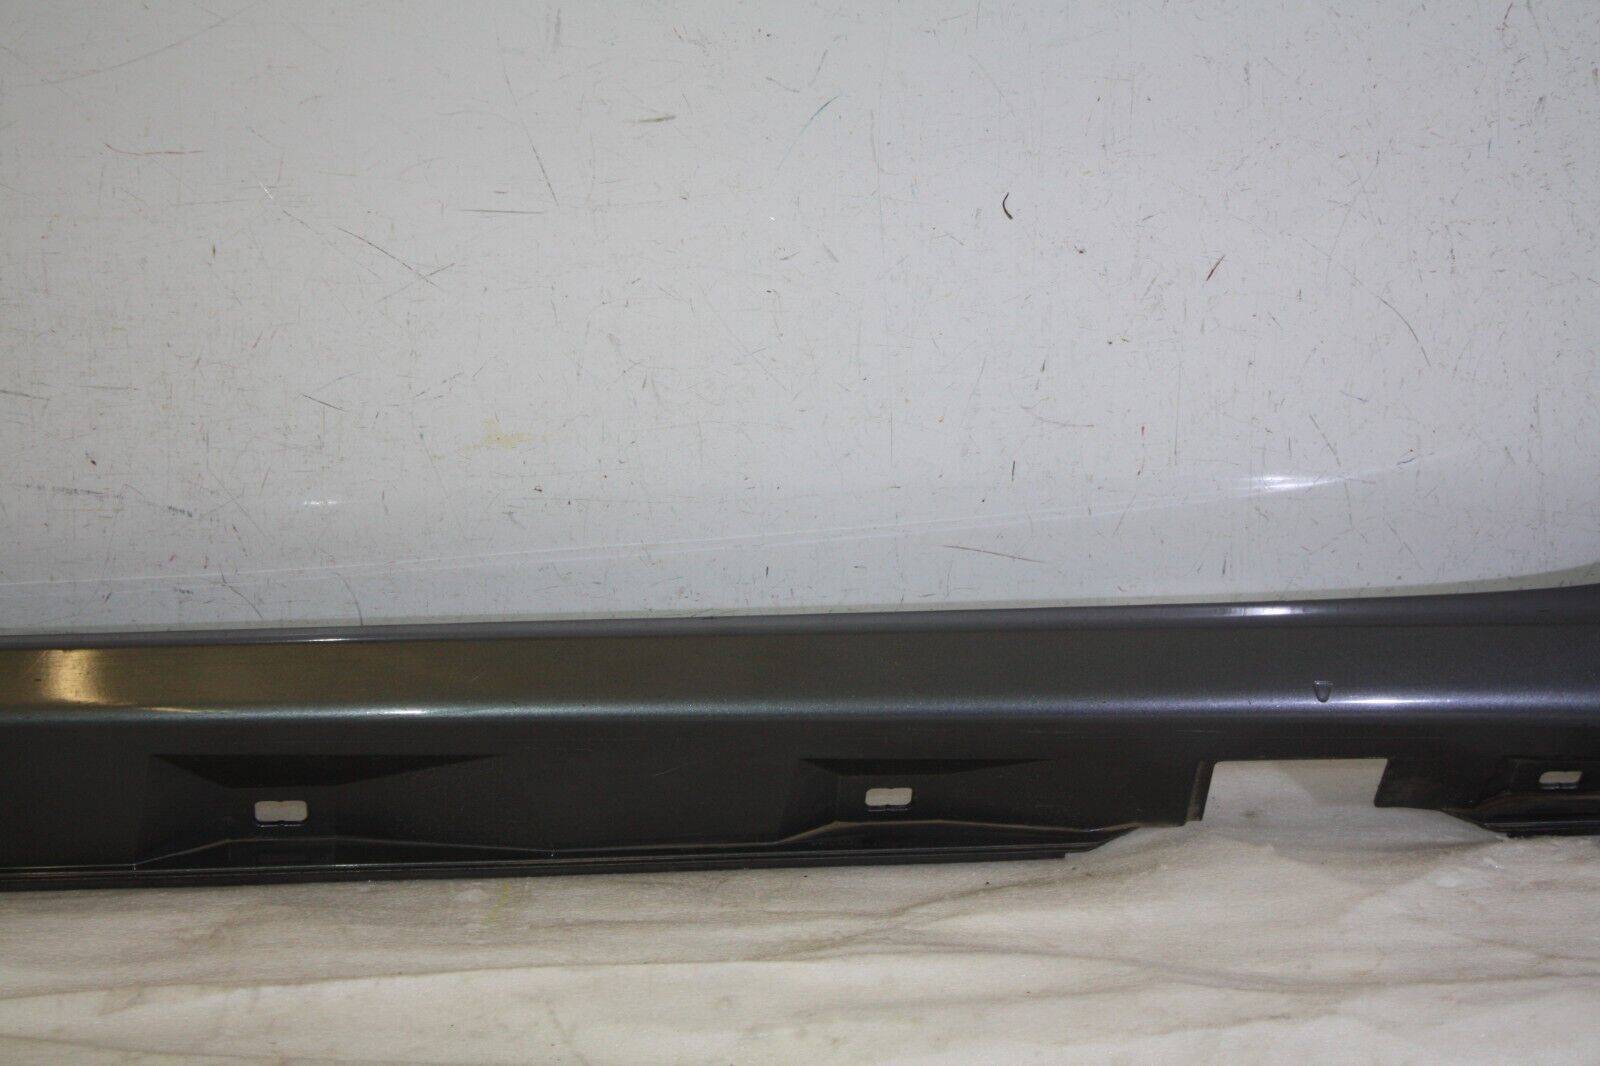 Audi-A6-C7-S-Line-Left-Side-Skirt-2011-TO-2014-4G0853859F-Genuine-SEE-PICS-176215349130-3